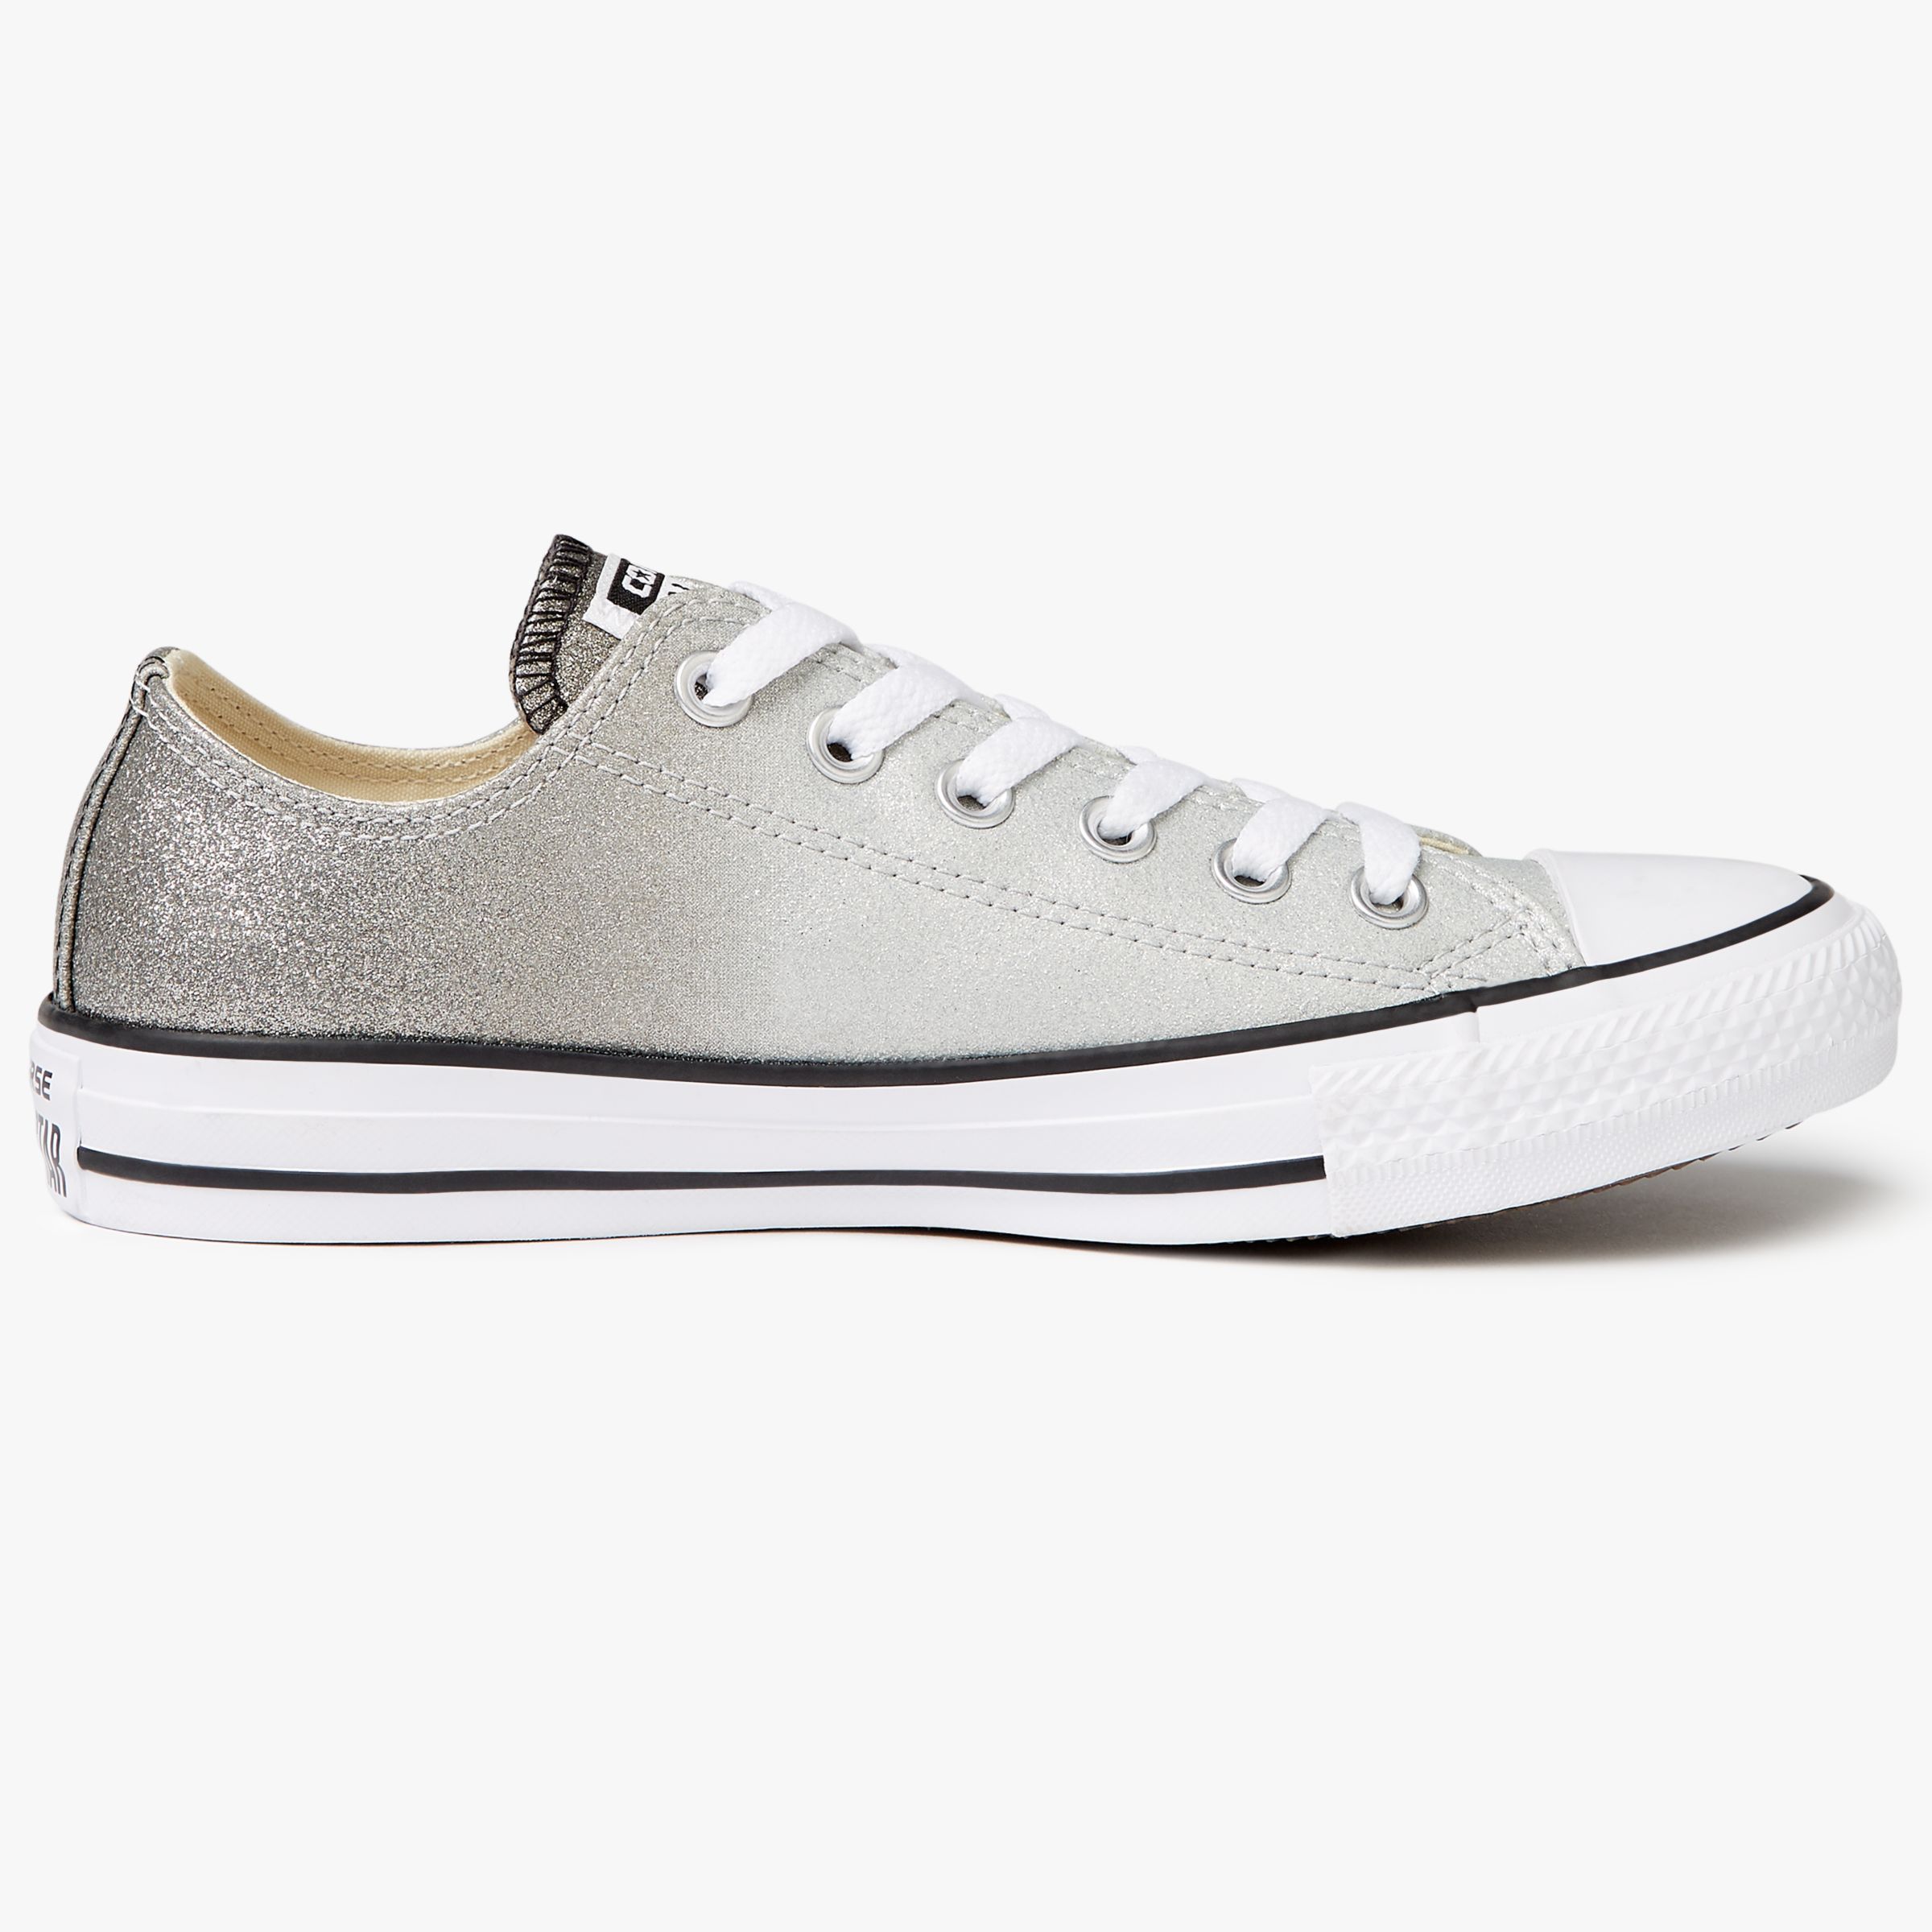 Metallic Converse Trainers | peacecommission.kdsg.gov.ng